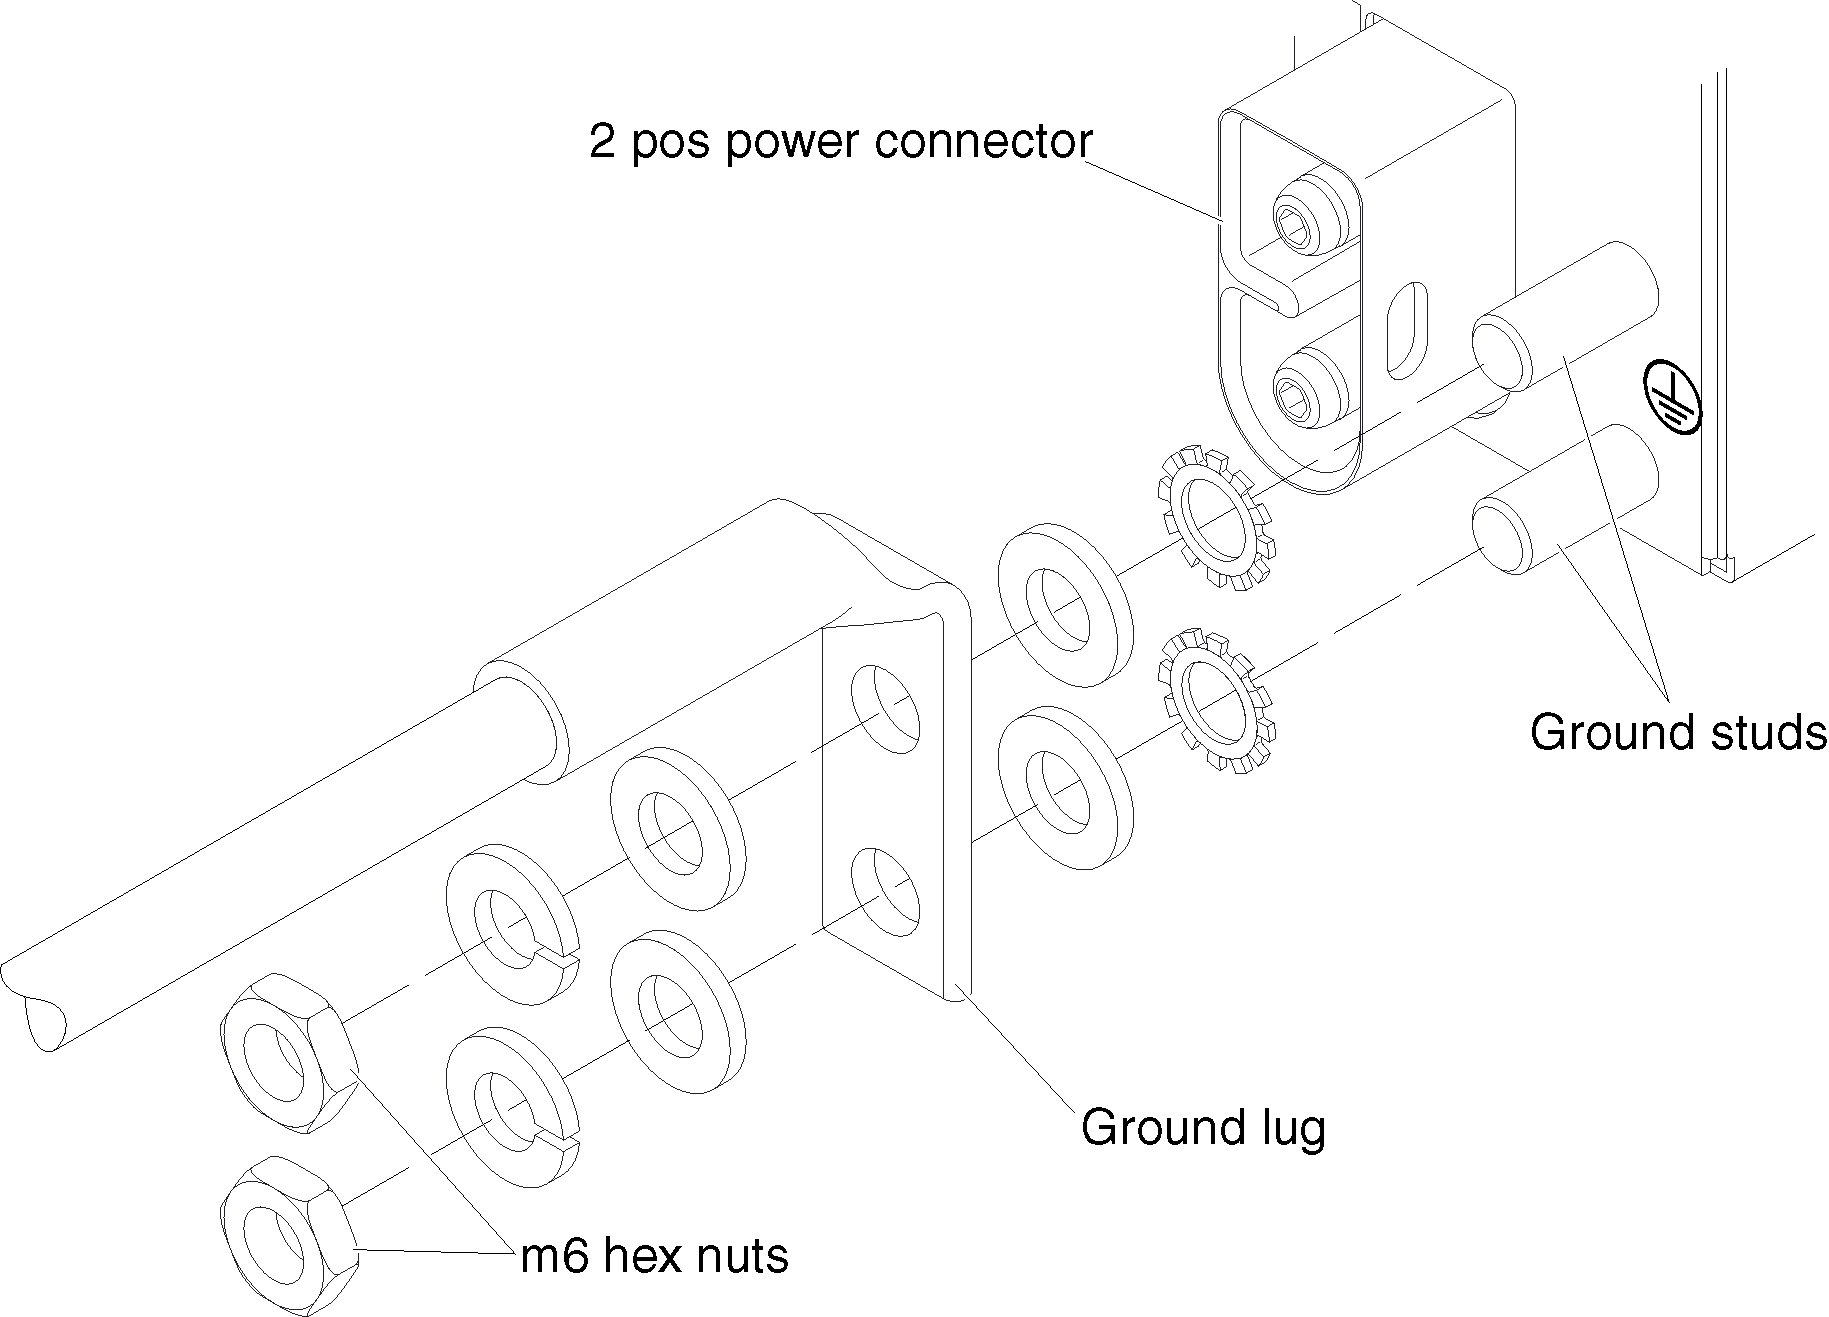 Illustration showing how to attach the ground cable